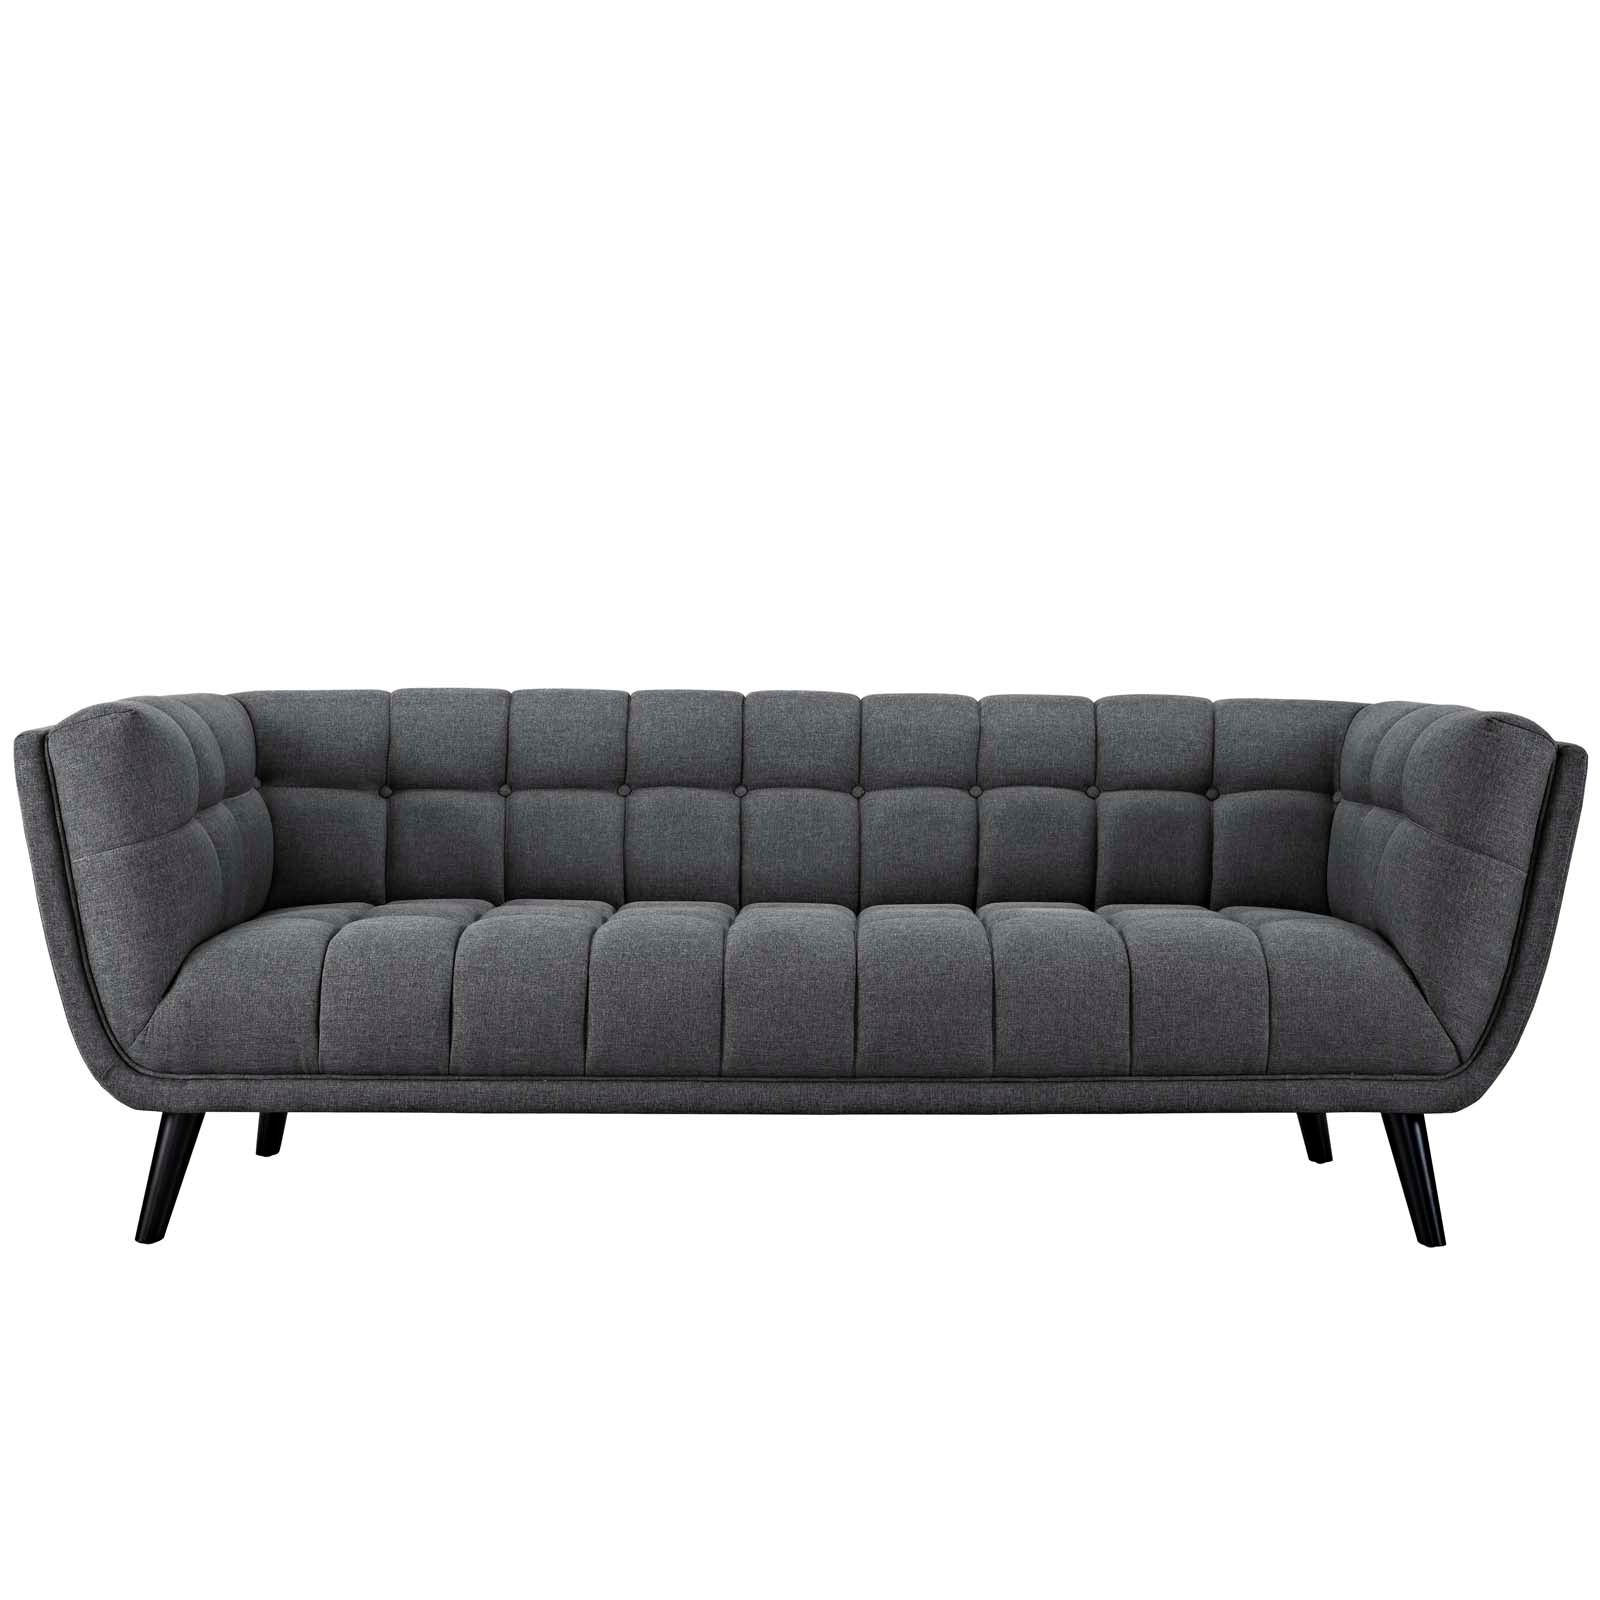 Modway Sofas & Couches - Bestow Upholstered Fabric Sofa Gray